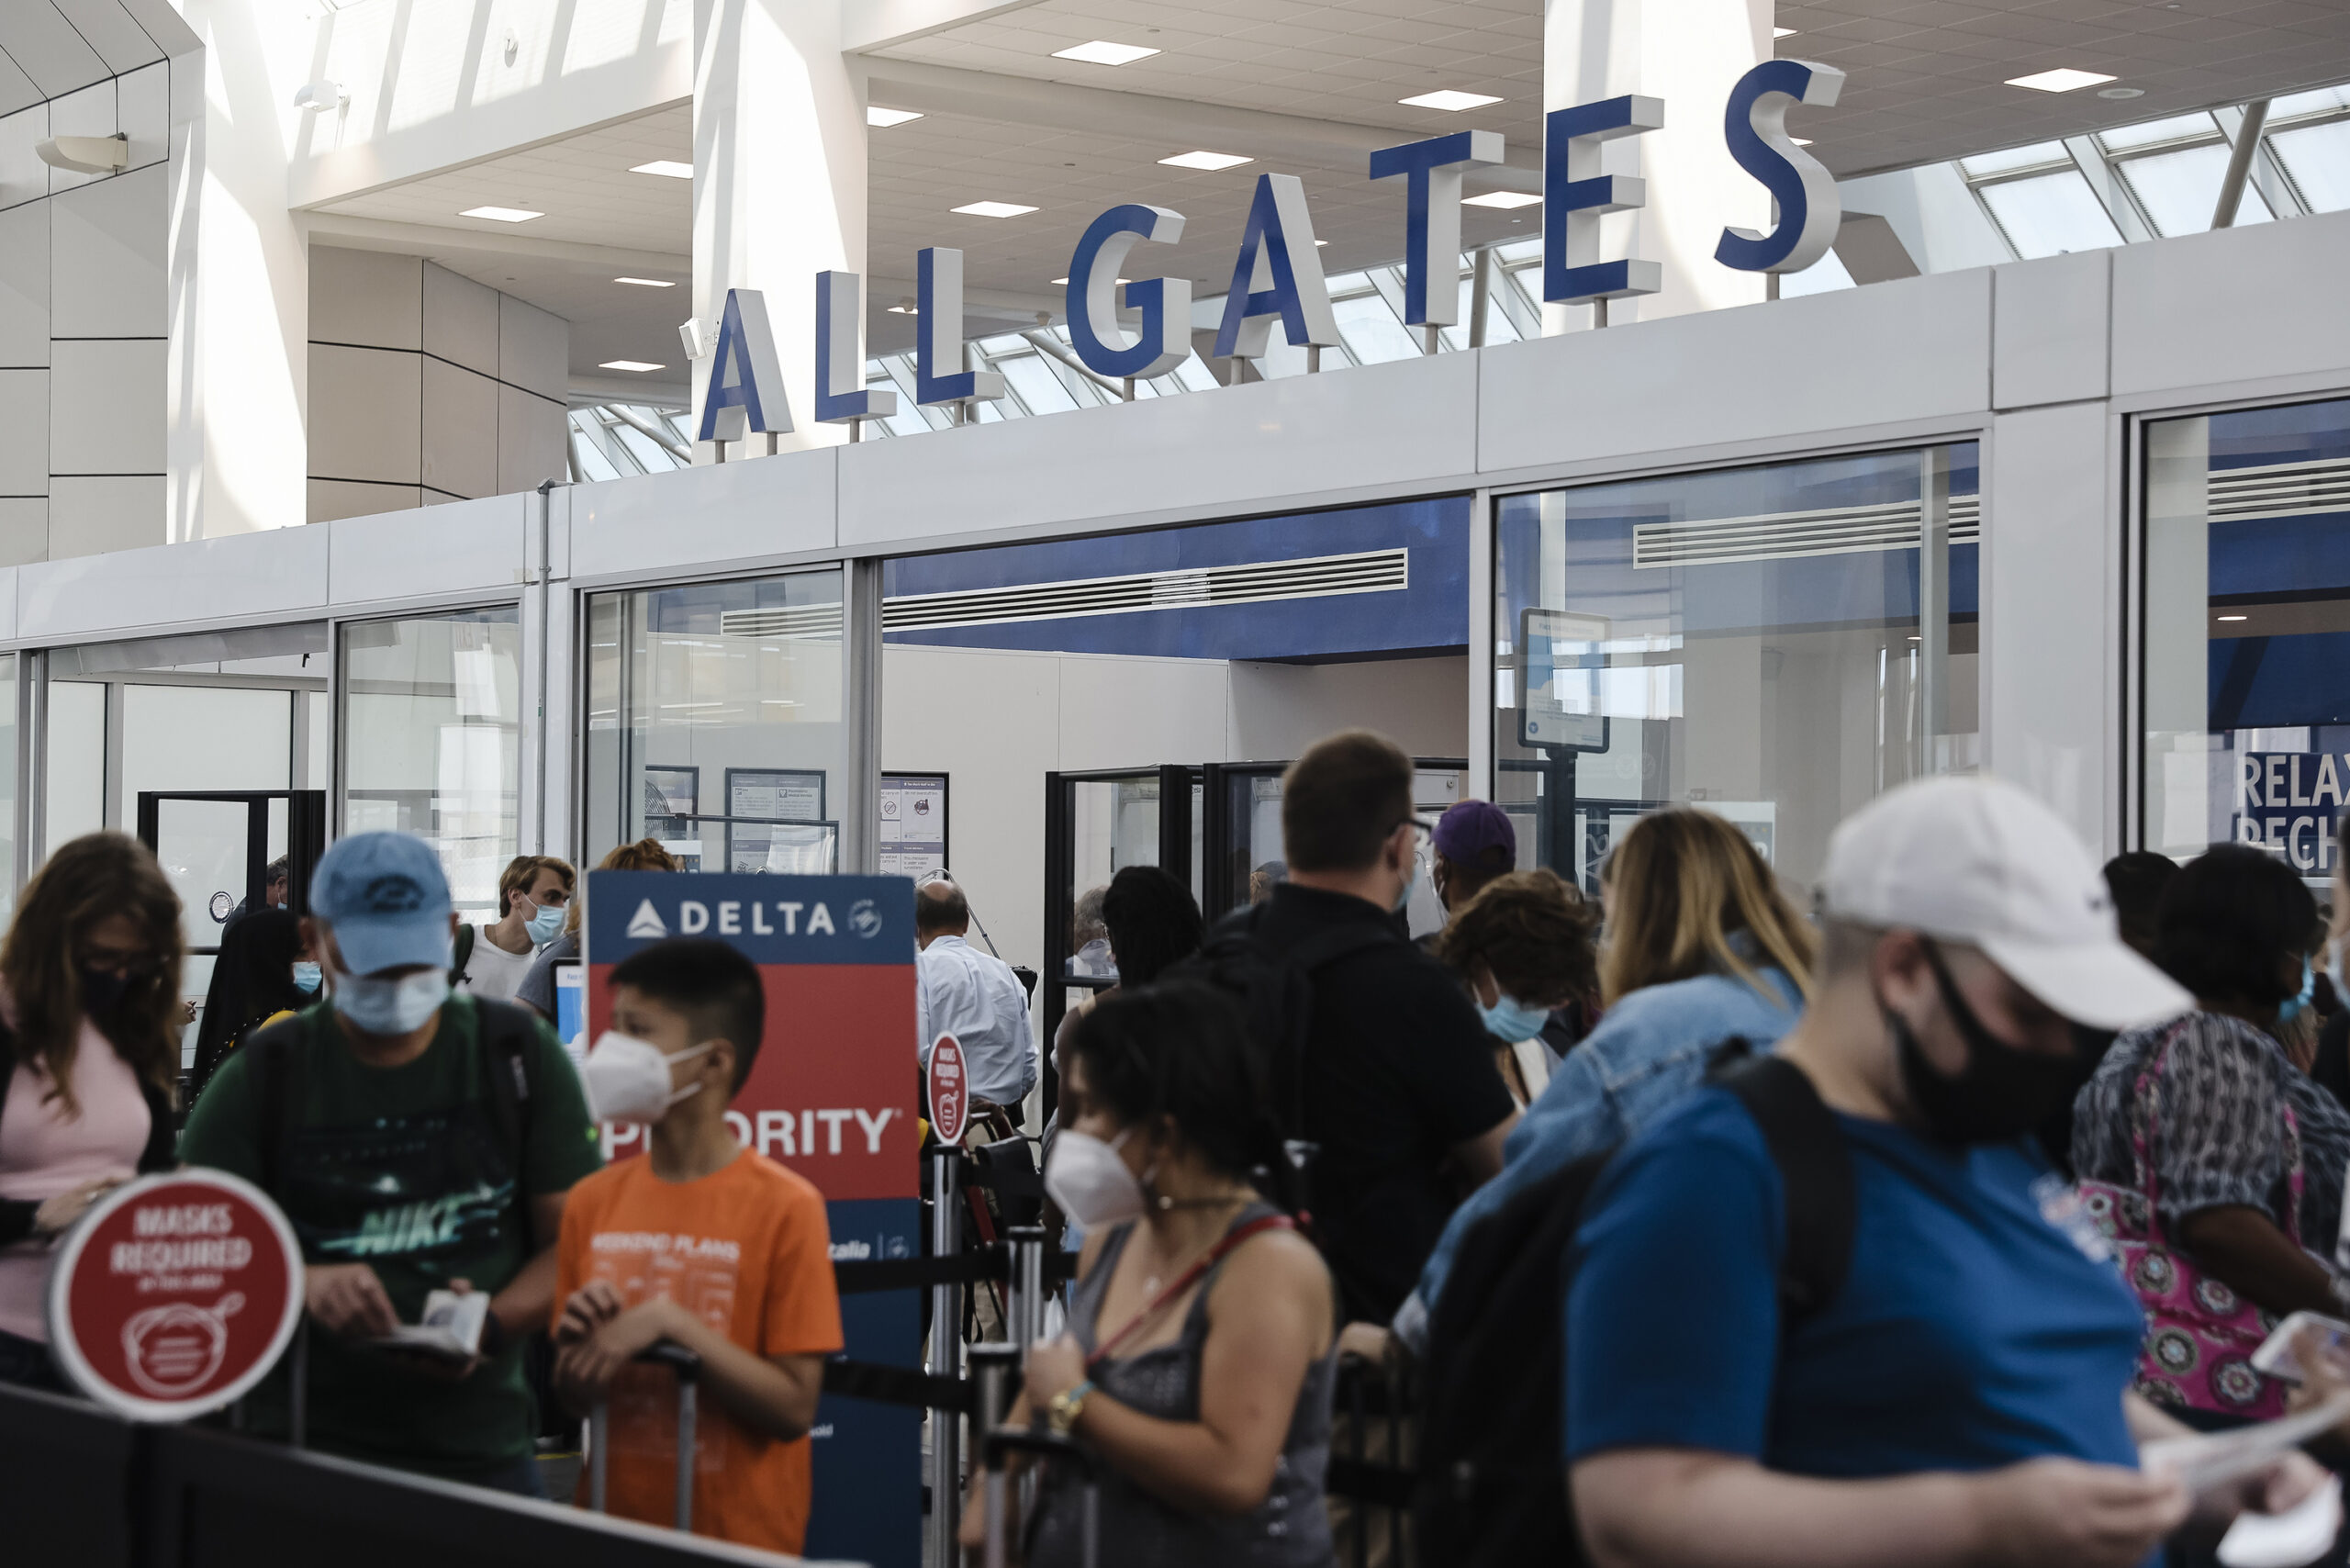 People stand in line around a sign that says "All Gates" wearing masks.